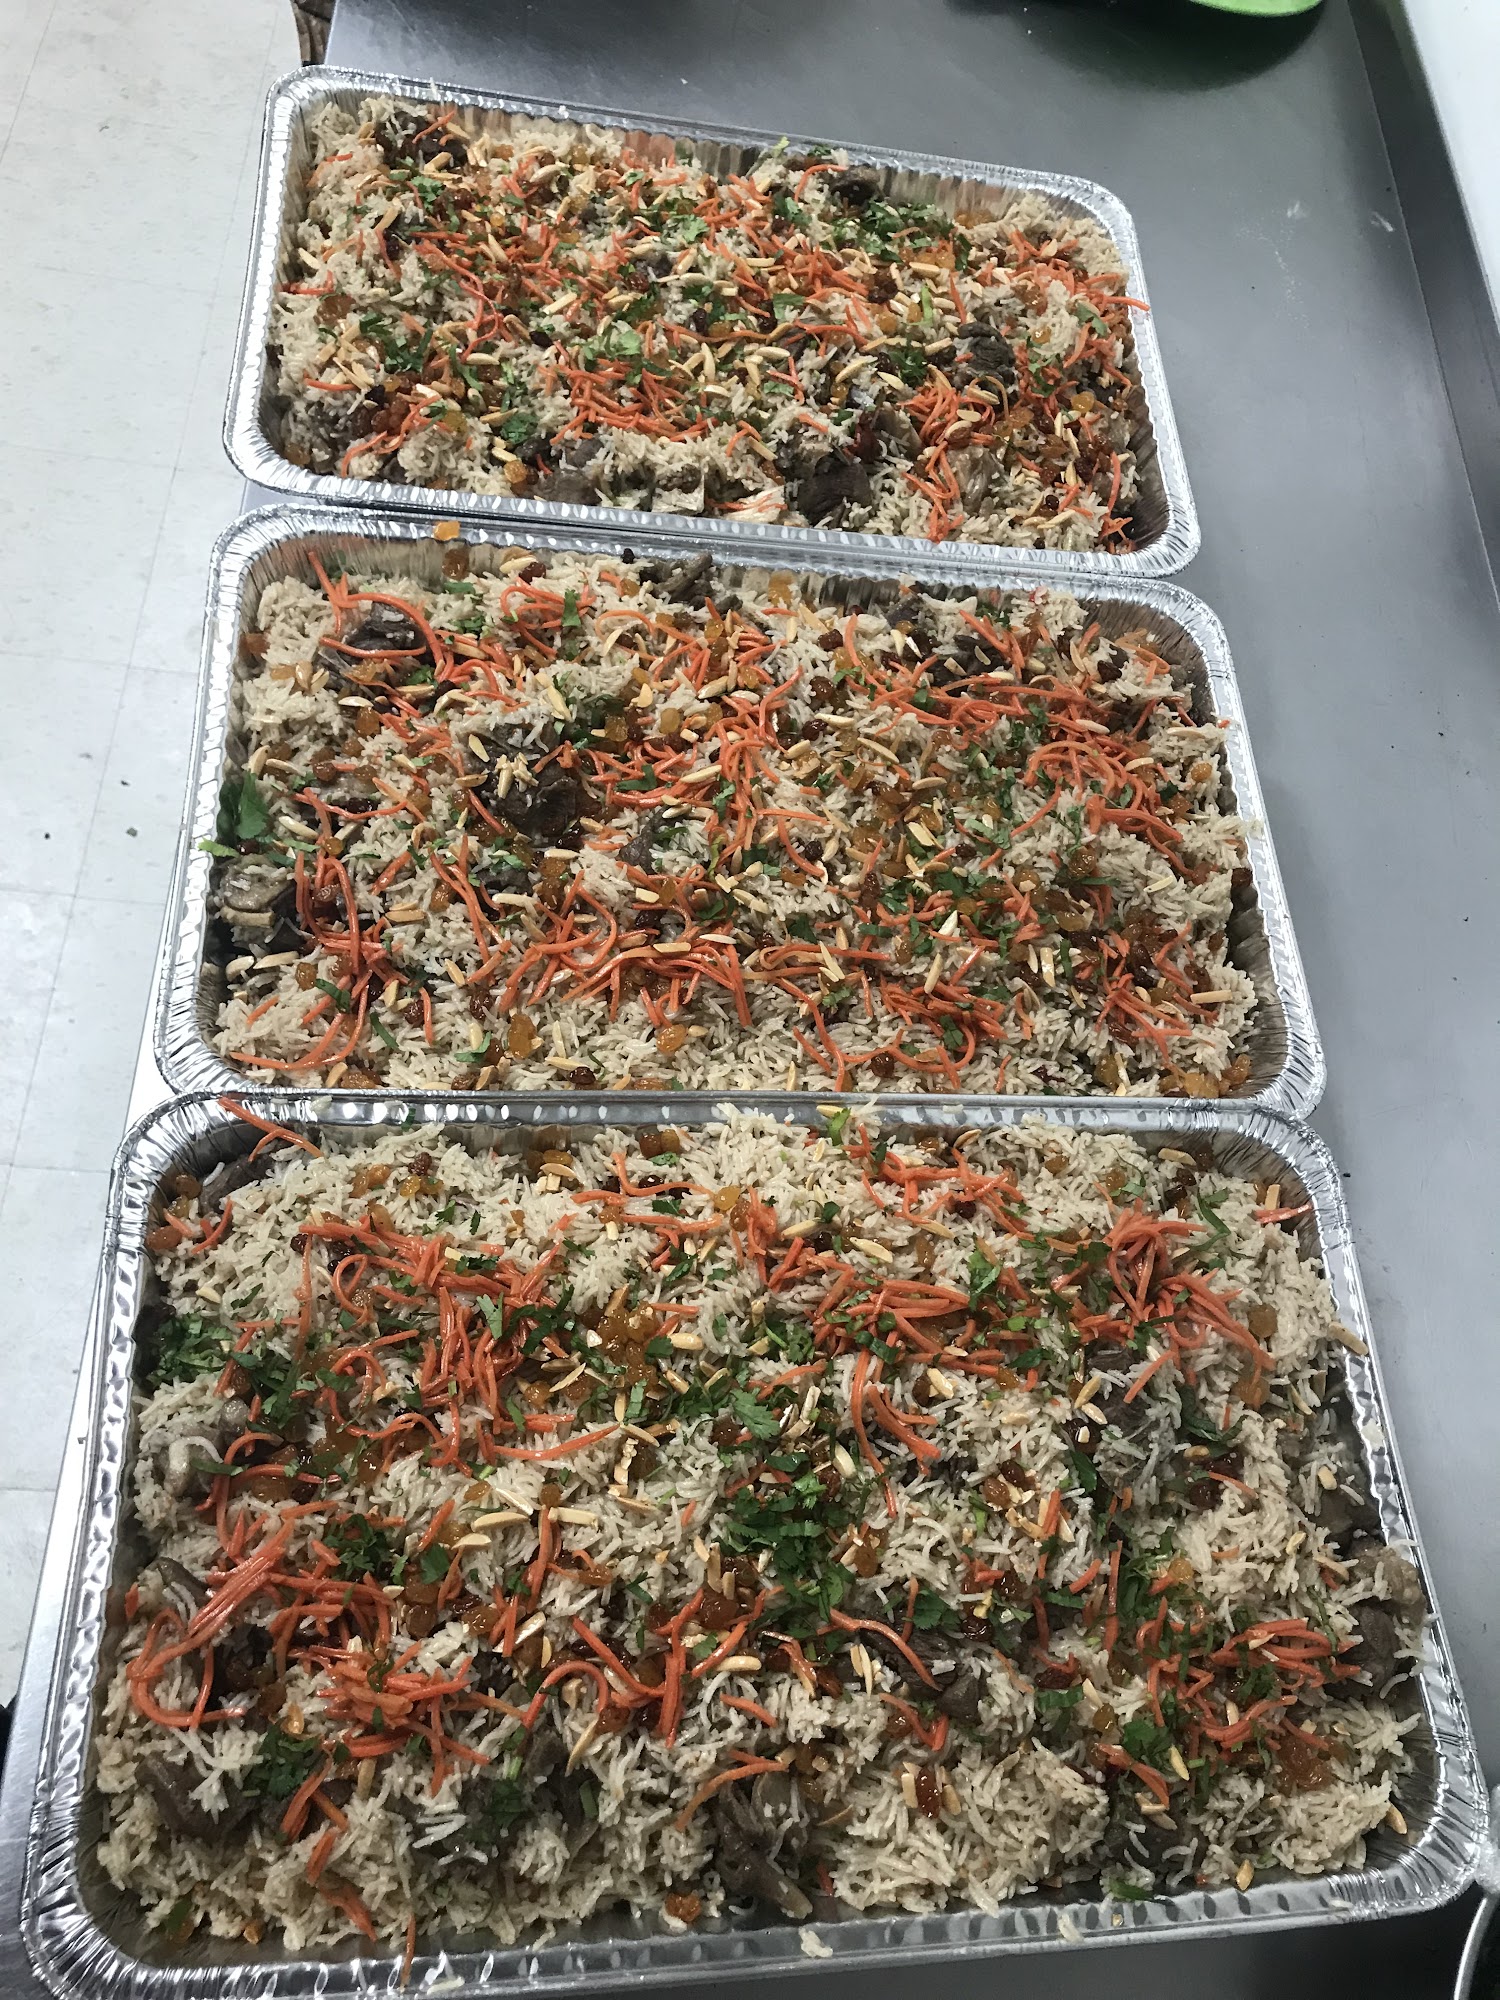 HUSSAIN Catering & Carry out